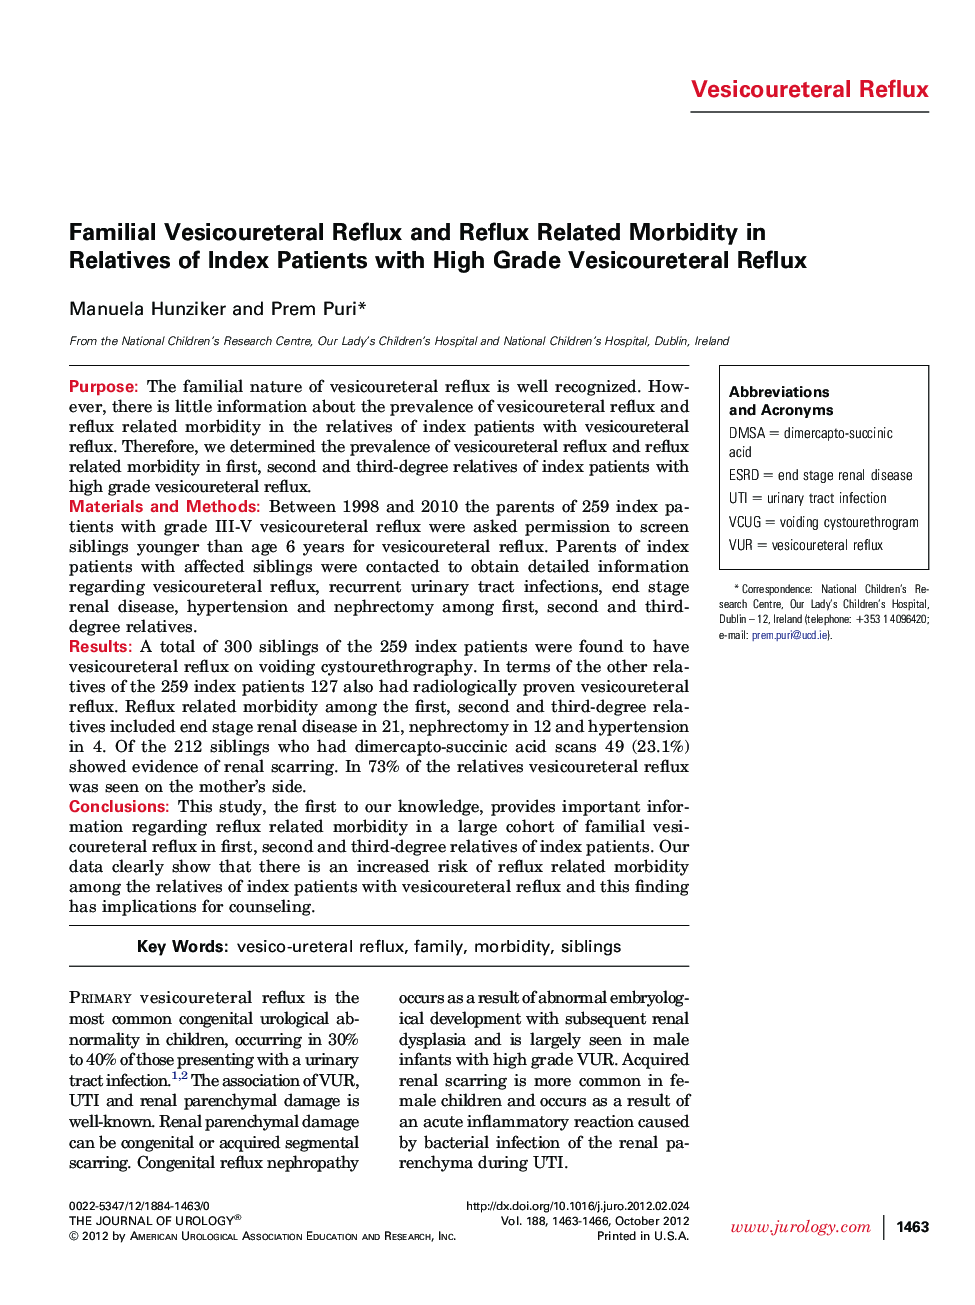 Familial Vesicoureteral Reflux and Reflux Related Morbidity in Relatives of Index Patients with High Grade Vesicoureteral Reflux